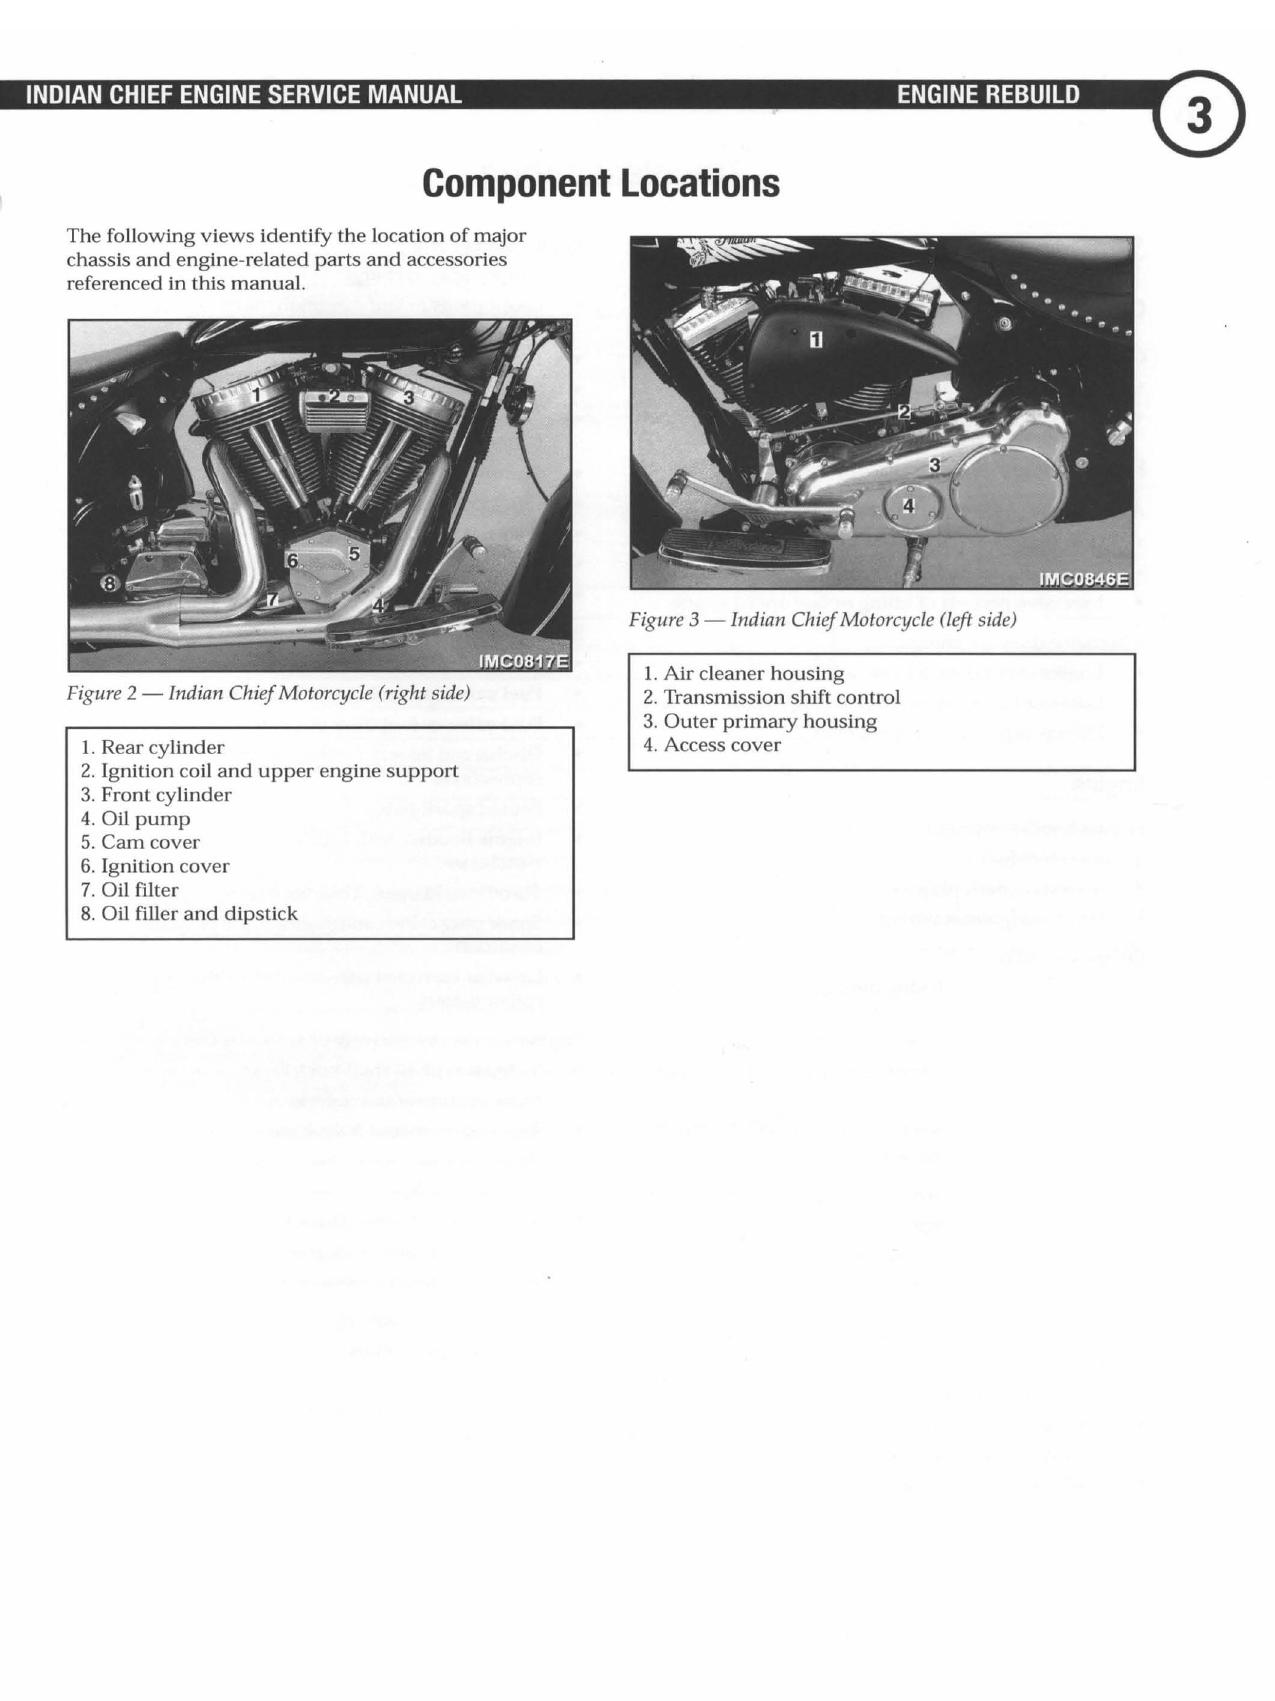 2002-2003 Indian Chief Powerplus 100 engine factory service manual Preview image 4